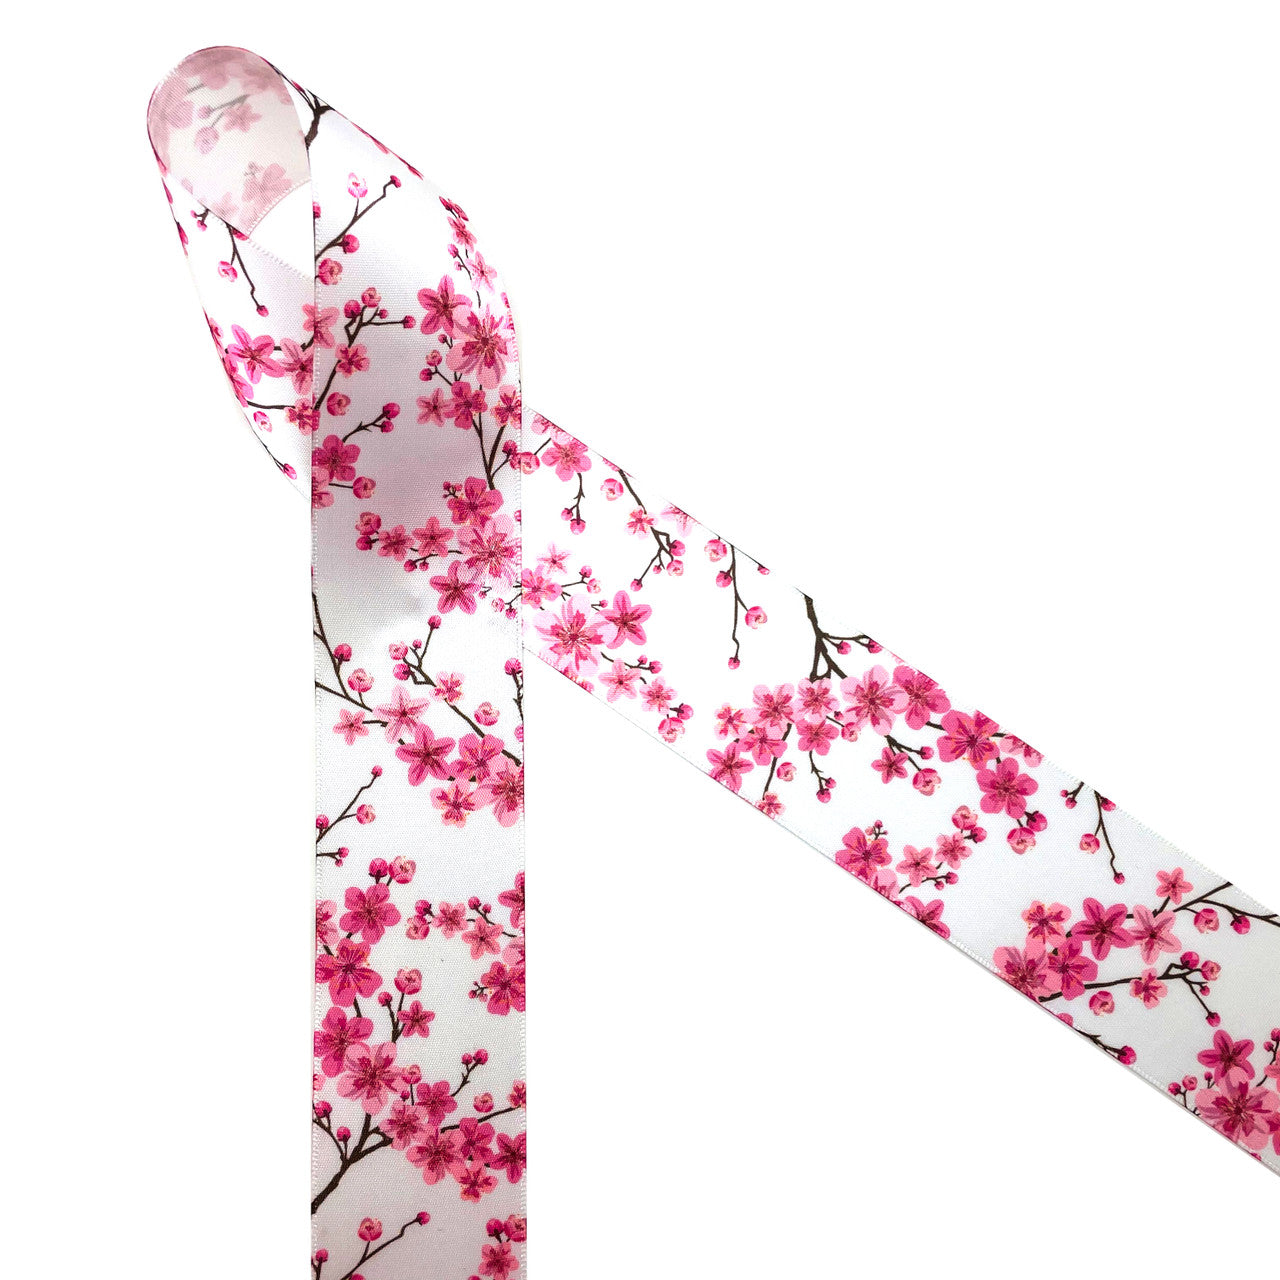 Cherry Blossoms are a sure sign of Spring! Beautiful pink cherry blossoms on brown branches printed on 1.5" white single face satin ribbon are perfect for every Spring event! This is a fabulous ribbon for Mother's Day, bridal showers, Cherry blossom festivals, floral design, quilting and Spring sewing projects! All our ribbon is designed and printed in the USA